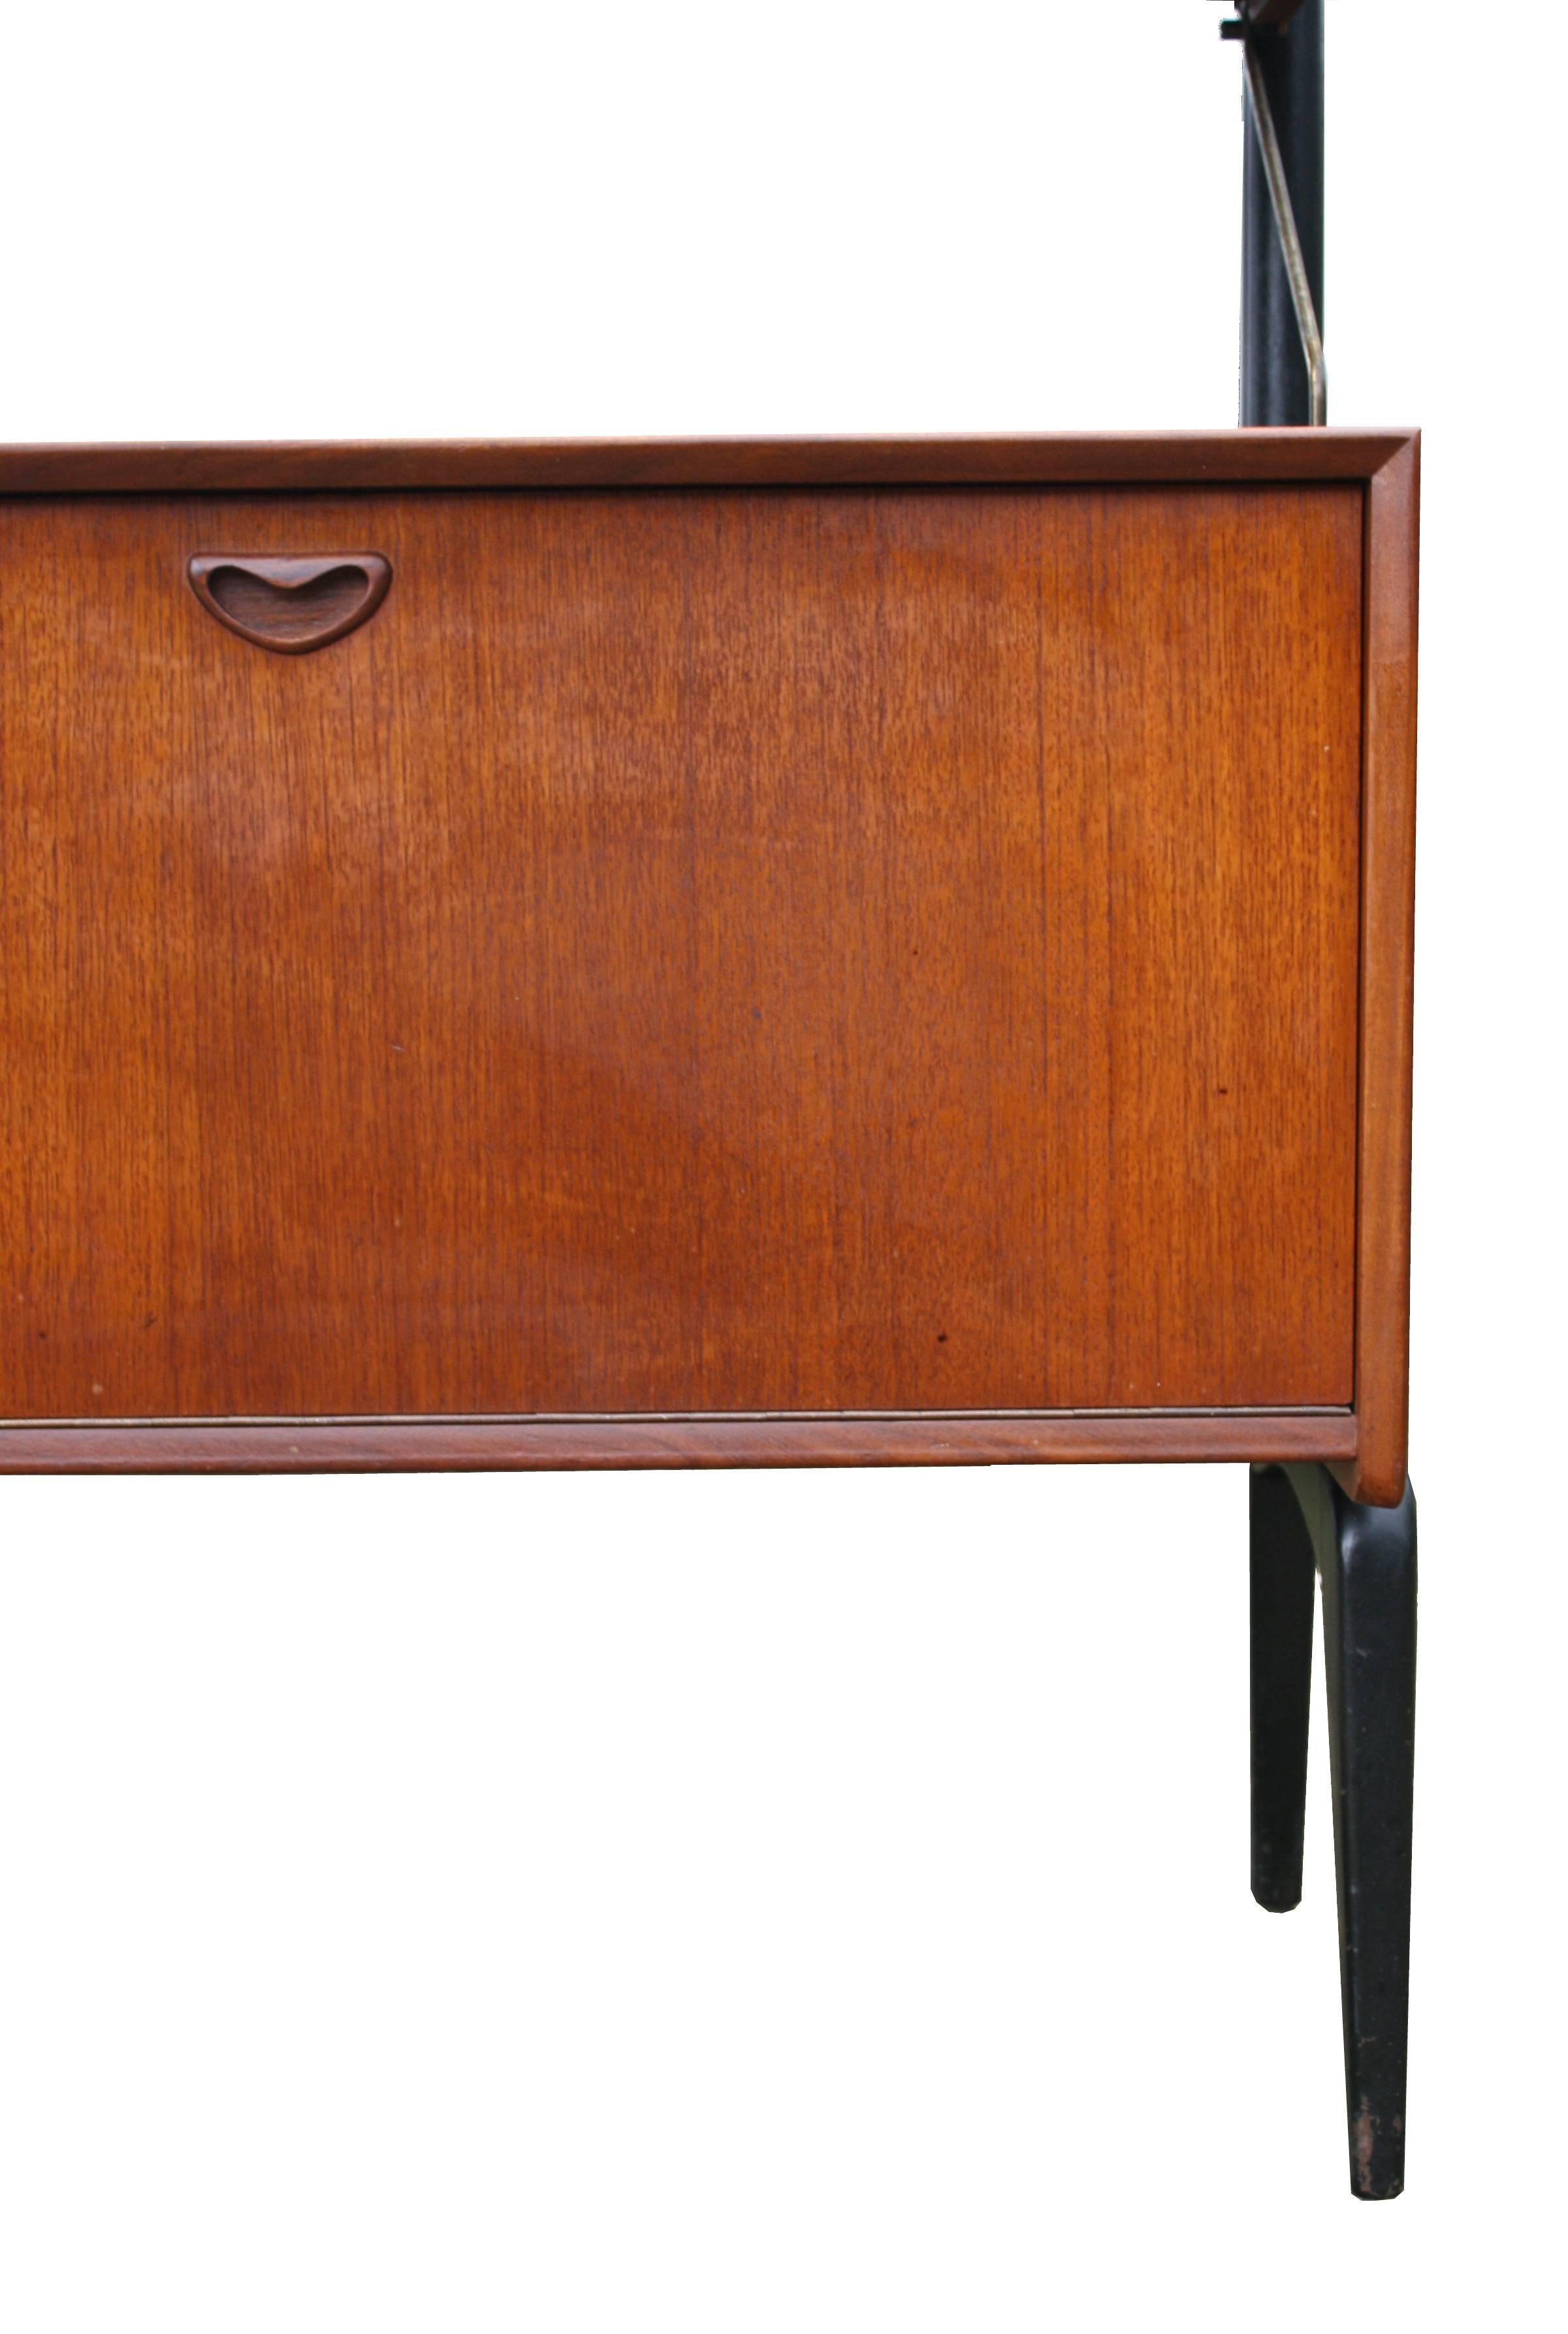 Mid-20th Century Stylish Freestanding Modular Wall Unit by Louis Van Teeffelen for Webe, 1958 For Sale